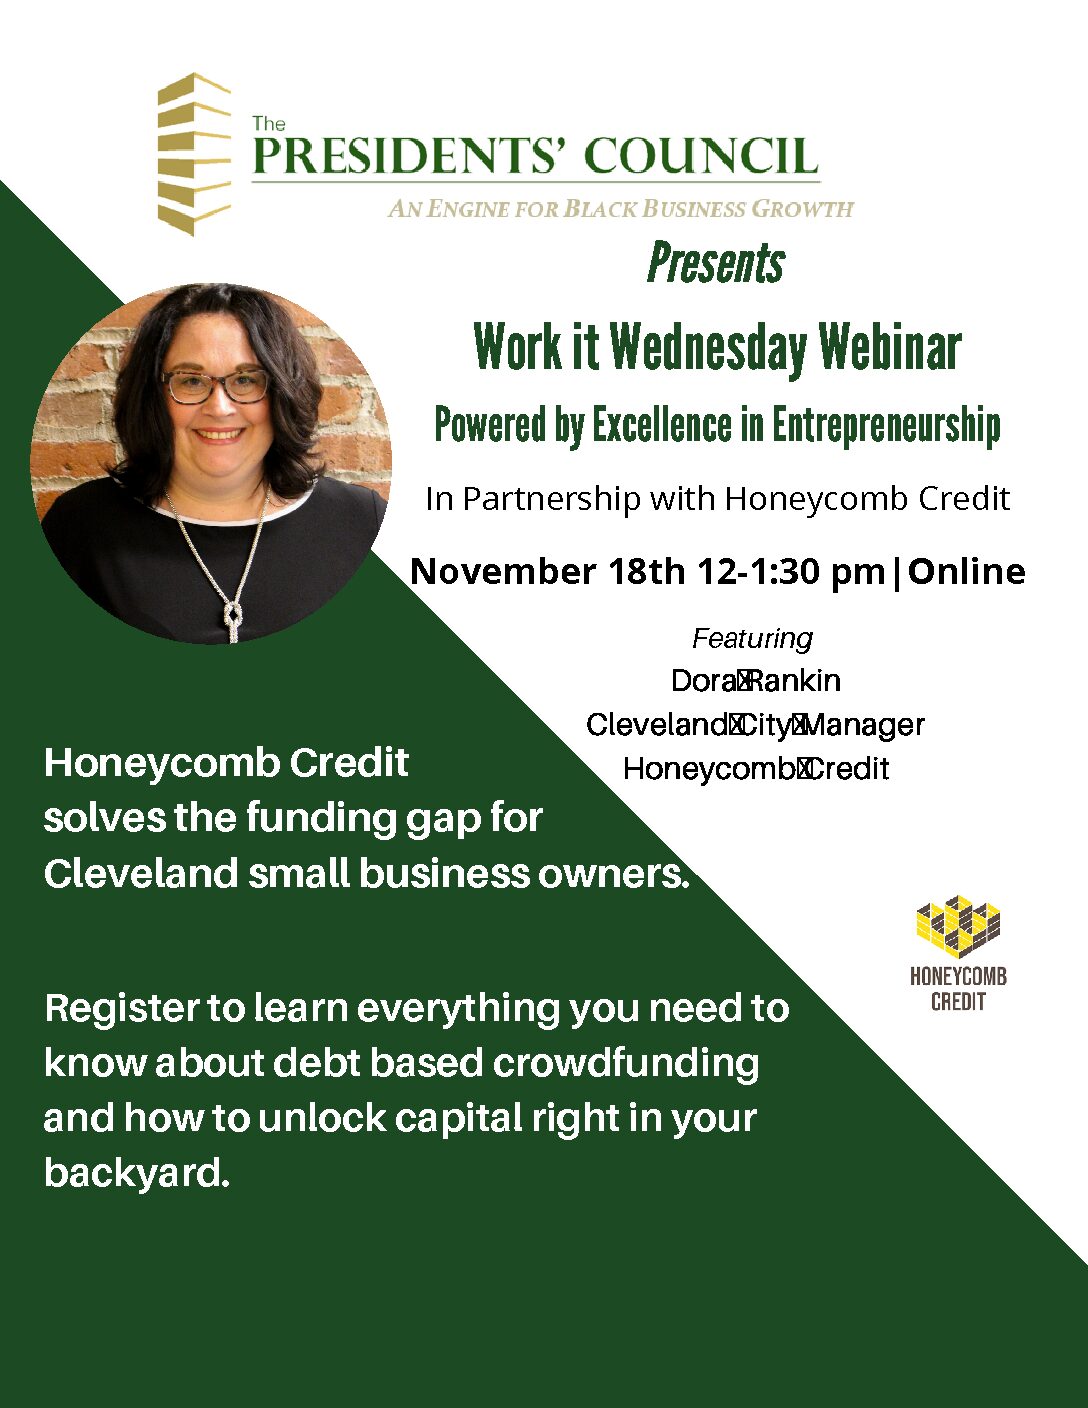 Work it Wednesday Webinar in Partnership with Honeycomb Credit